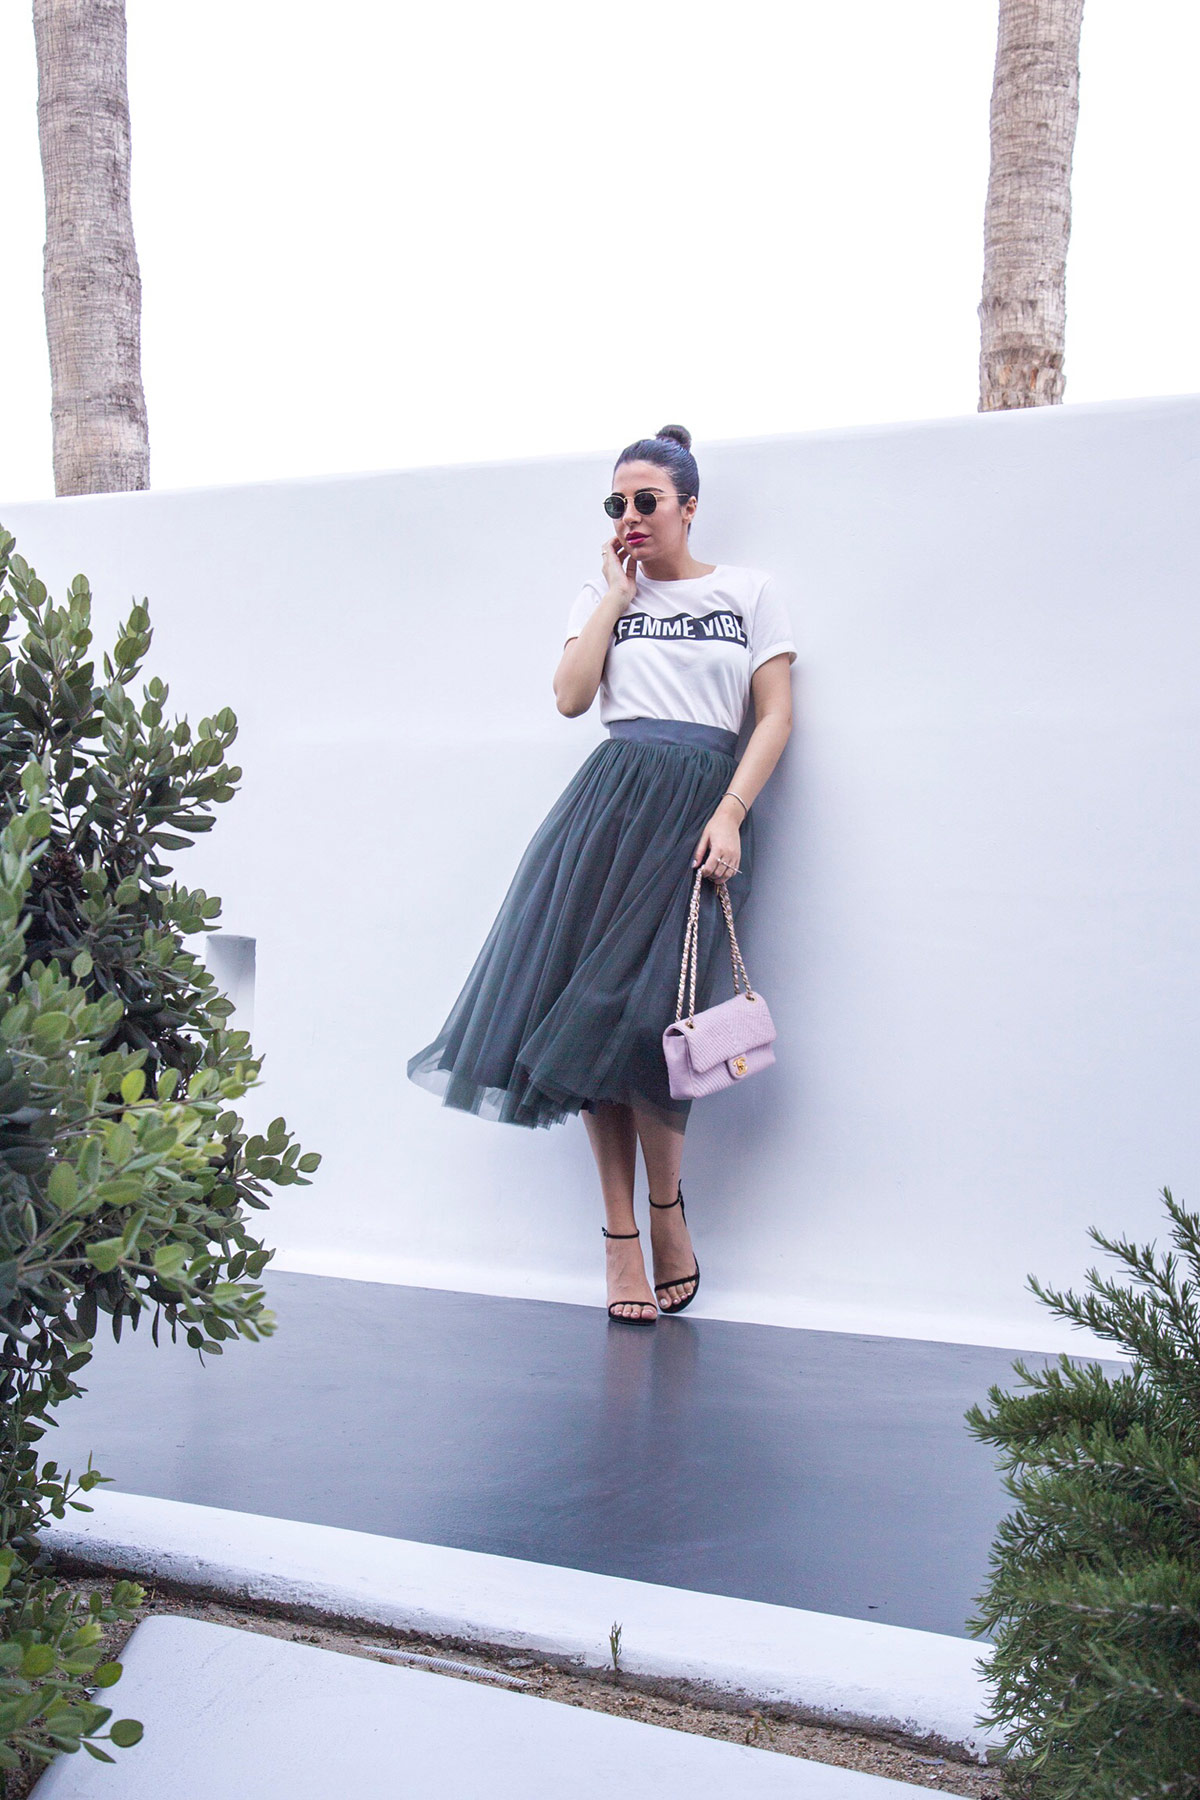 Stella Asteria wearing tulle skirt with logo top, Stuart Weitzman sandals & pink Chanel bag